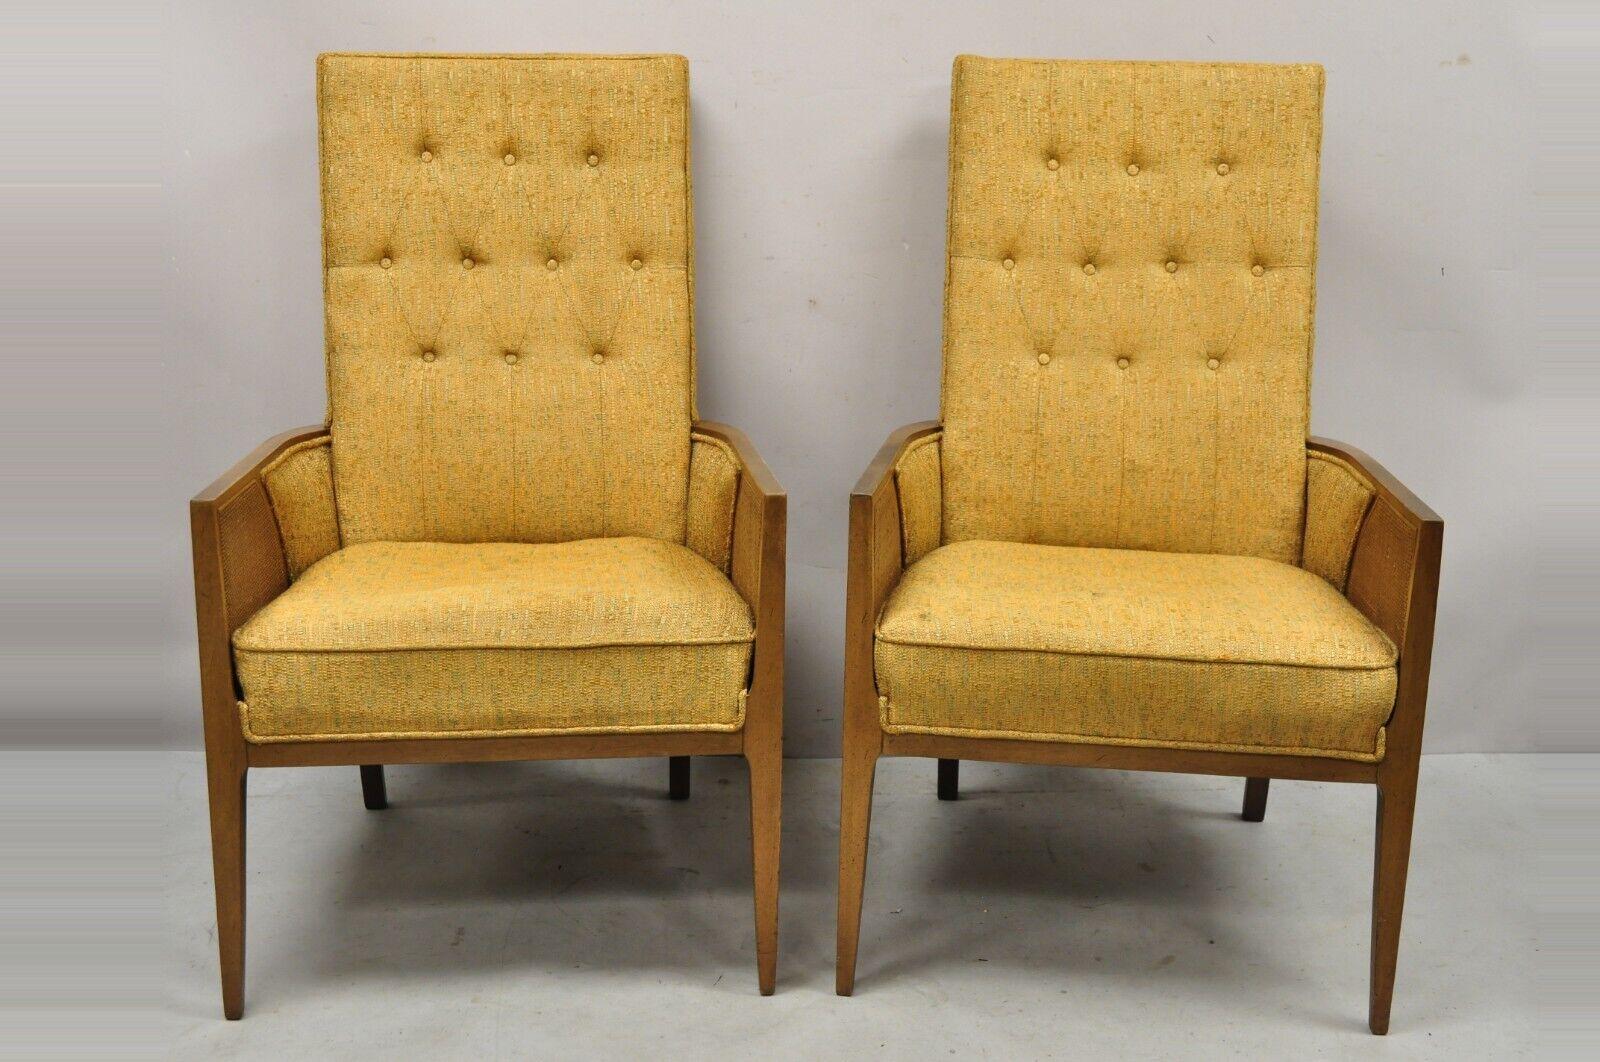 Mid Century Hollywood Regency Sculpted Wood Cane Panel Lounge Chairs - a Pair. Item features cane side panels, solid wood frame, tapered legs, very nice vintage pair, sleek sculptural form, to be reupholstered. Foam hard throughout. Circa Mid 20th